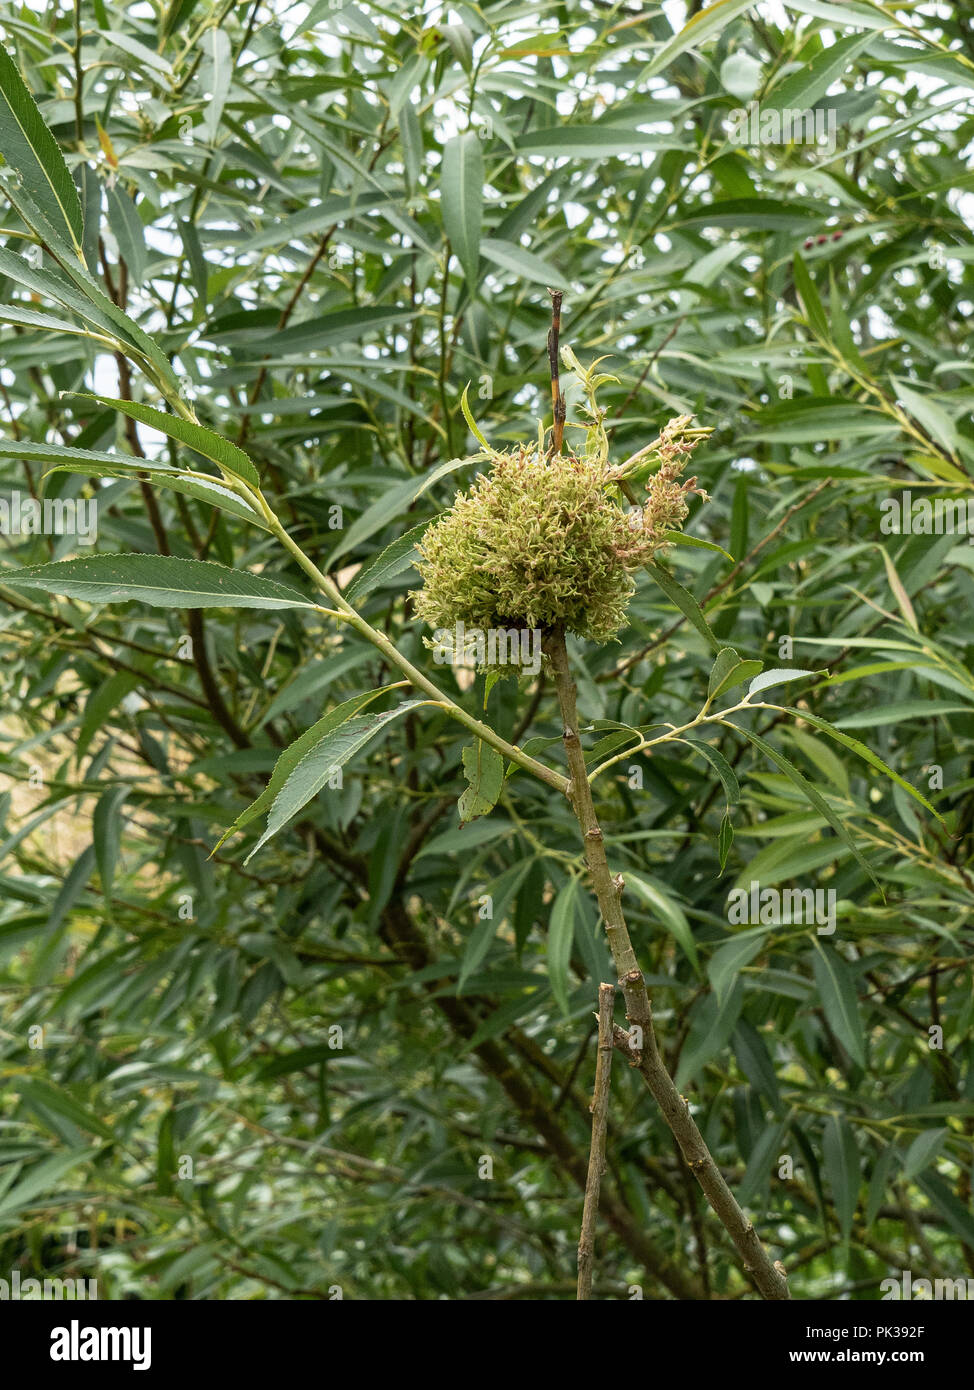 A the early stage of a witches broom growing on a willow sapling Stock Photo